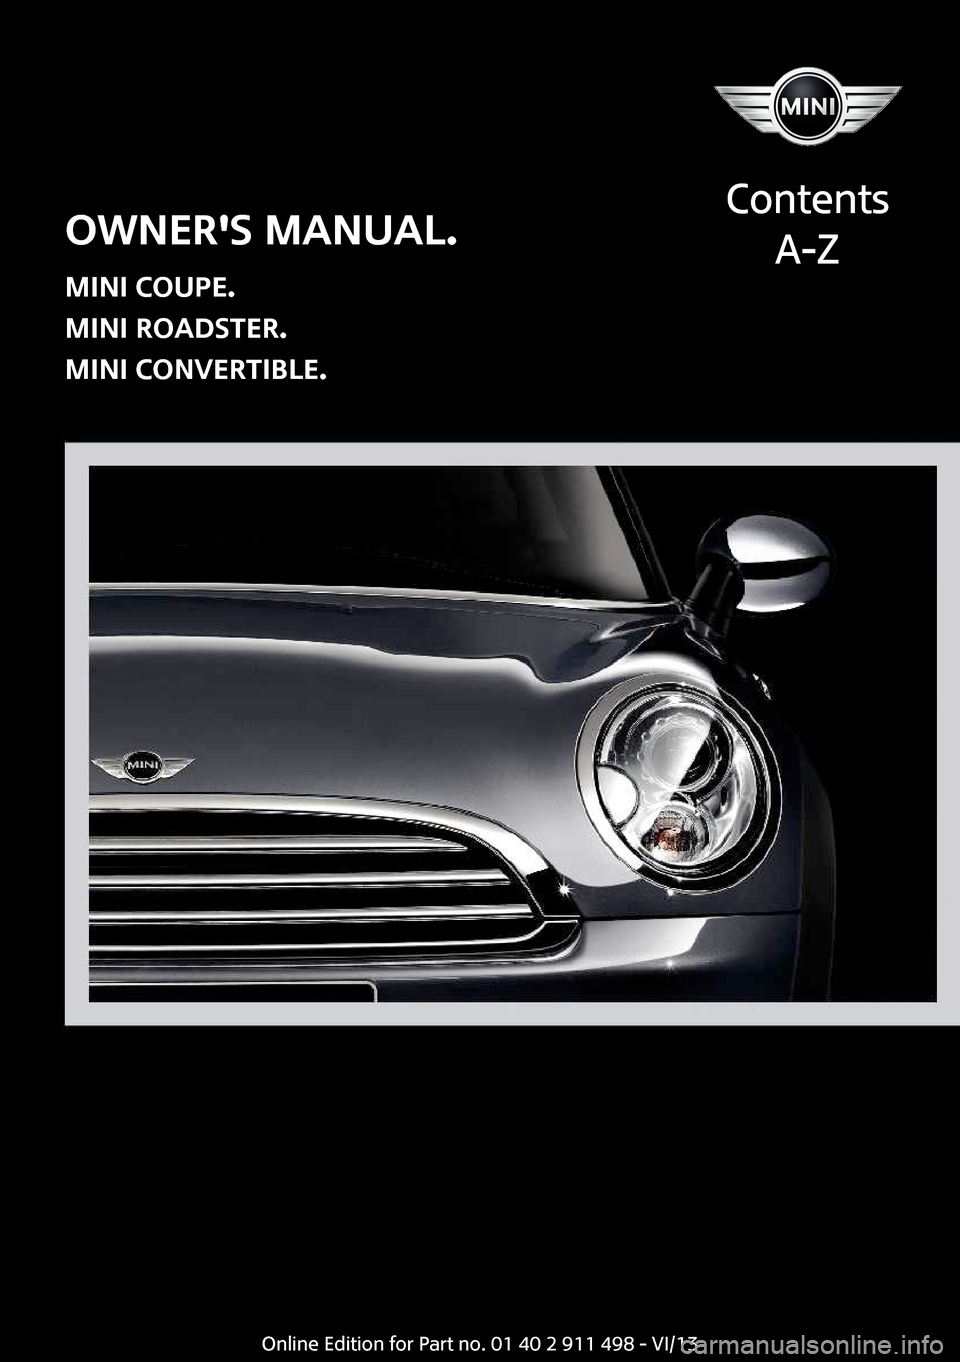 MINI Coupe 2014  Owners Manual (Mini Connected) Owners Manual.
MINI Coupe.
MINI Roadster.
MINI Convertible.
Contents
A-ZOnline Edition for Part no. 01 40 2 911 498 - VI/13  